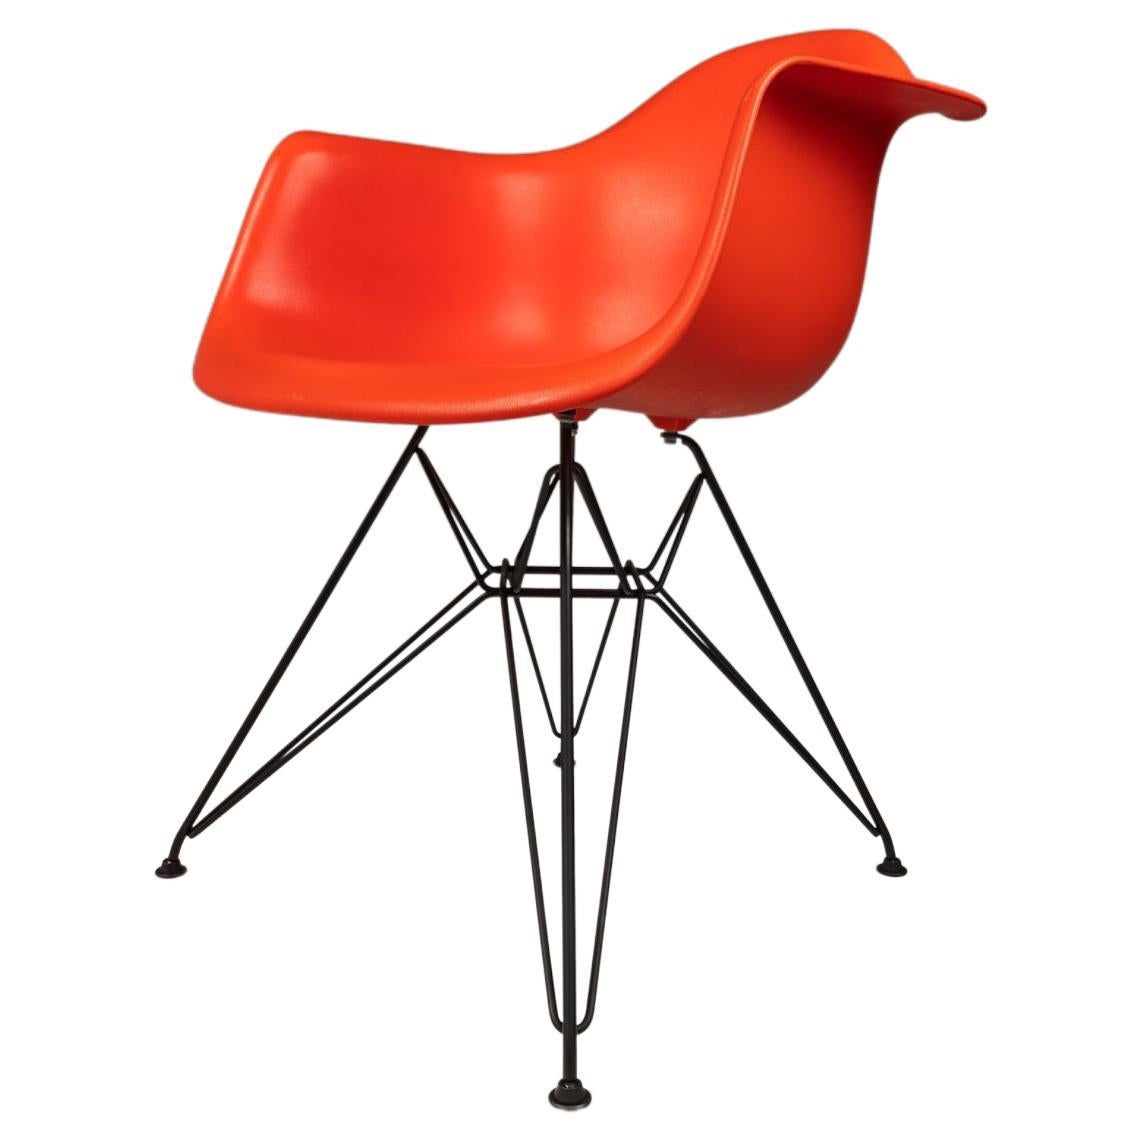 DAR Eiffel Base Lounge Chair by Charles & Ray Eames for Herman Miller, USA, 2000 For Sale